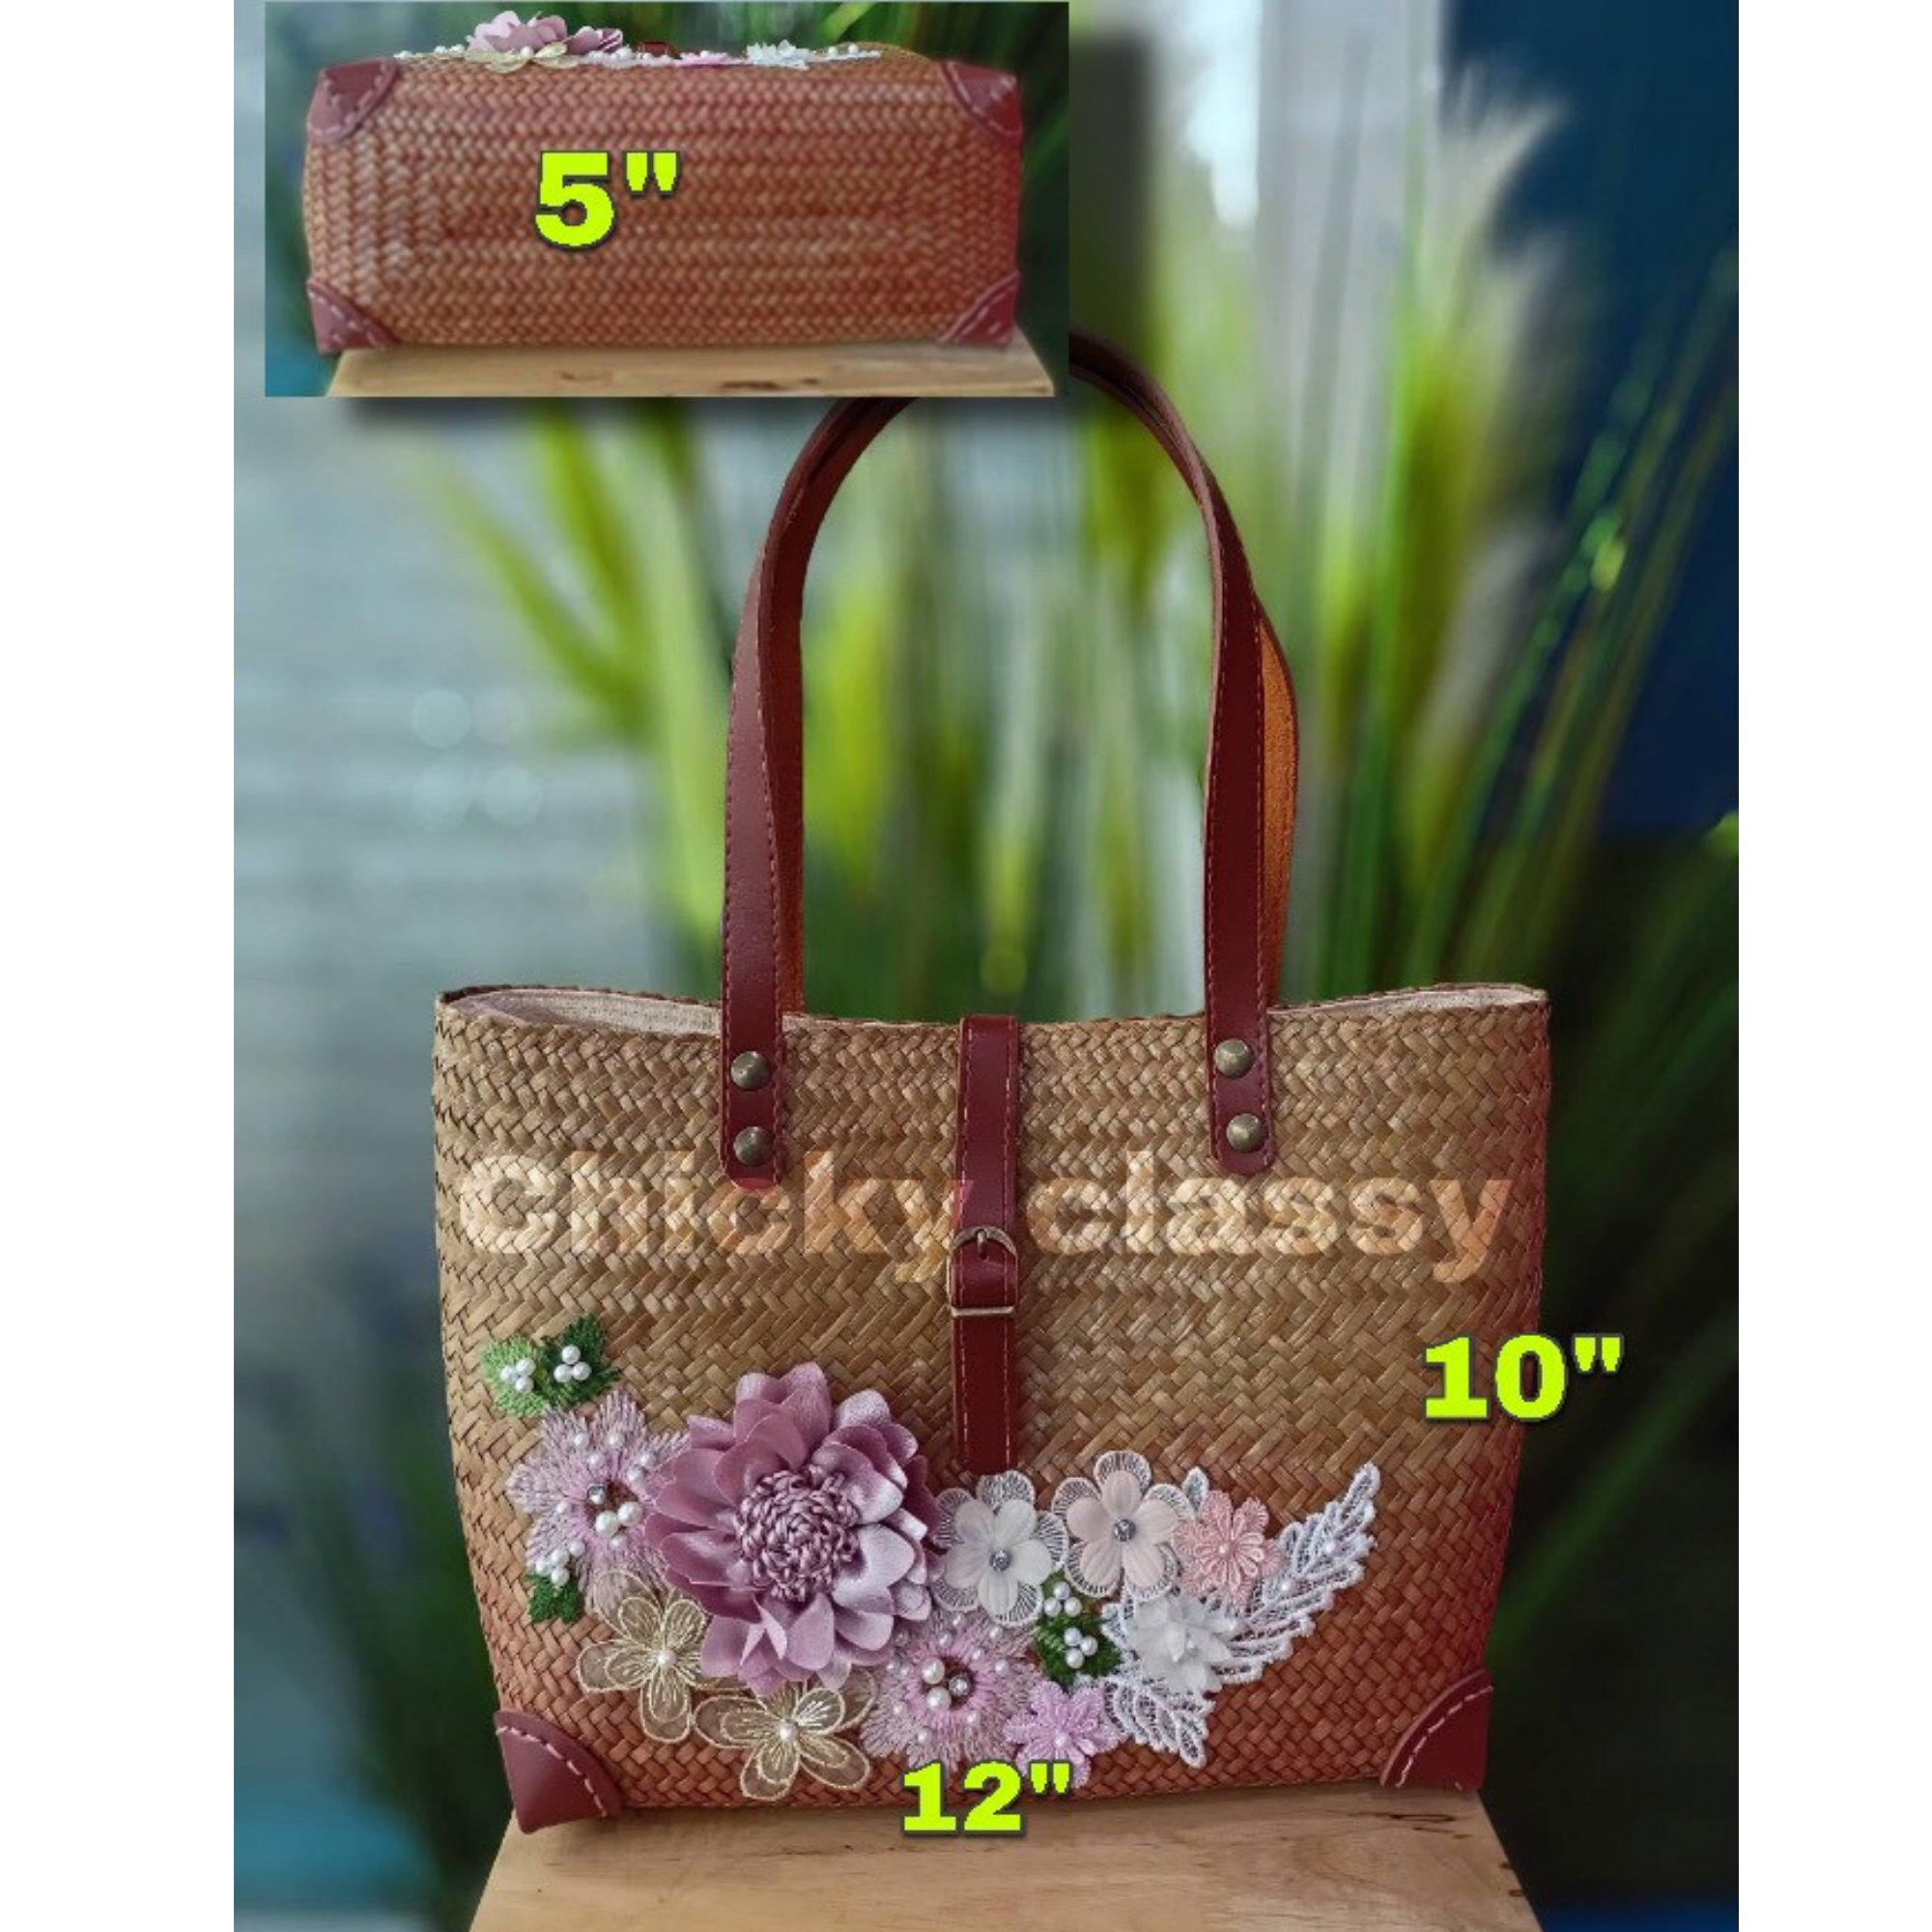 Chicky Classy Home made Classic bag